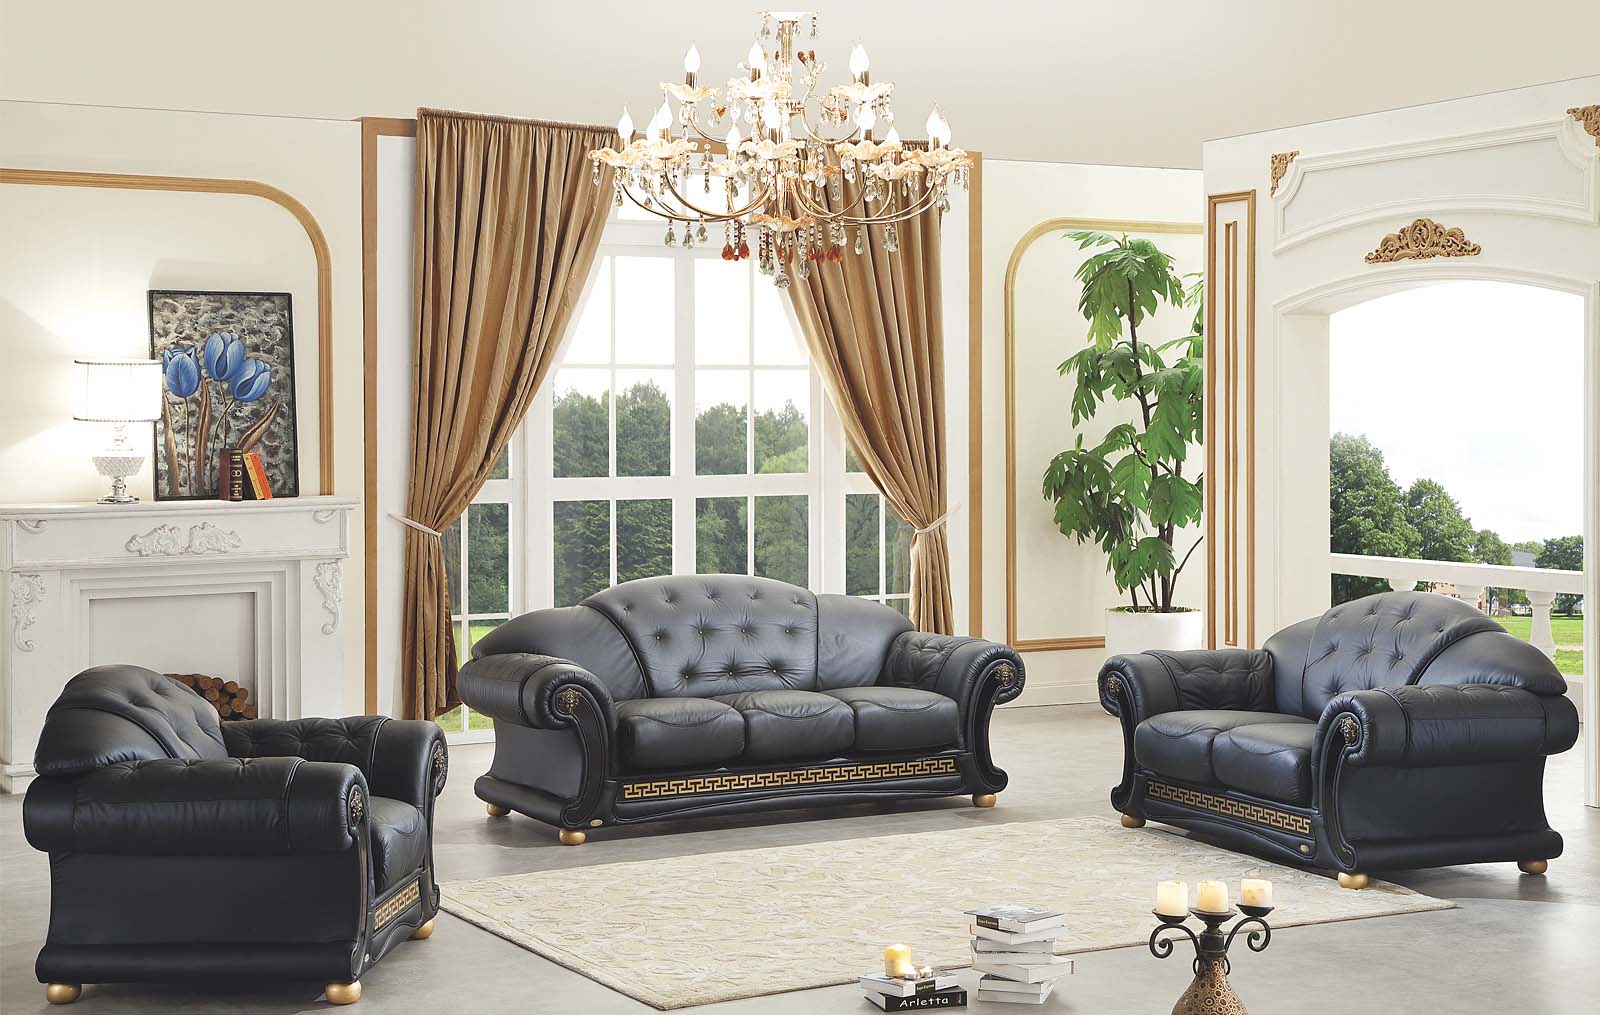 Living Room Furniture Sleepers Sofas Loveseats and Chairs Apolo Black